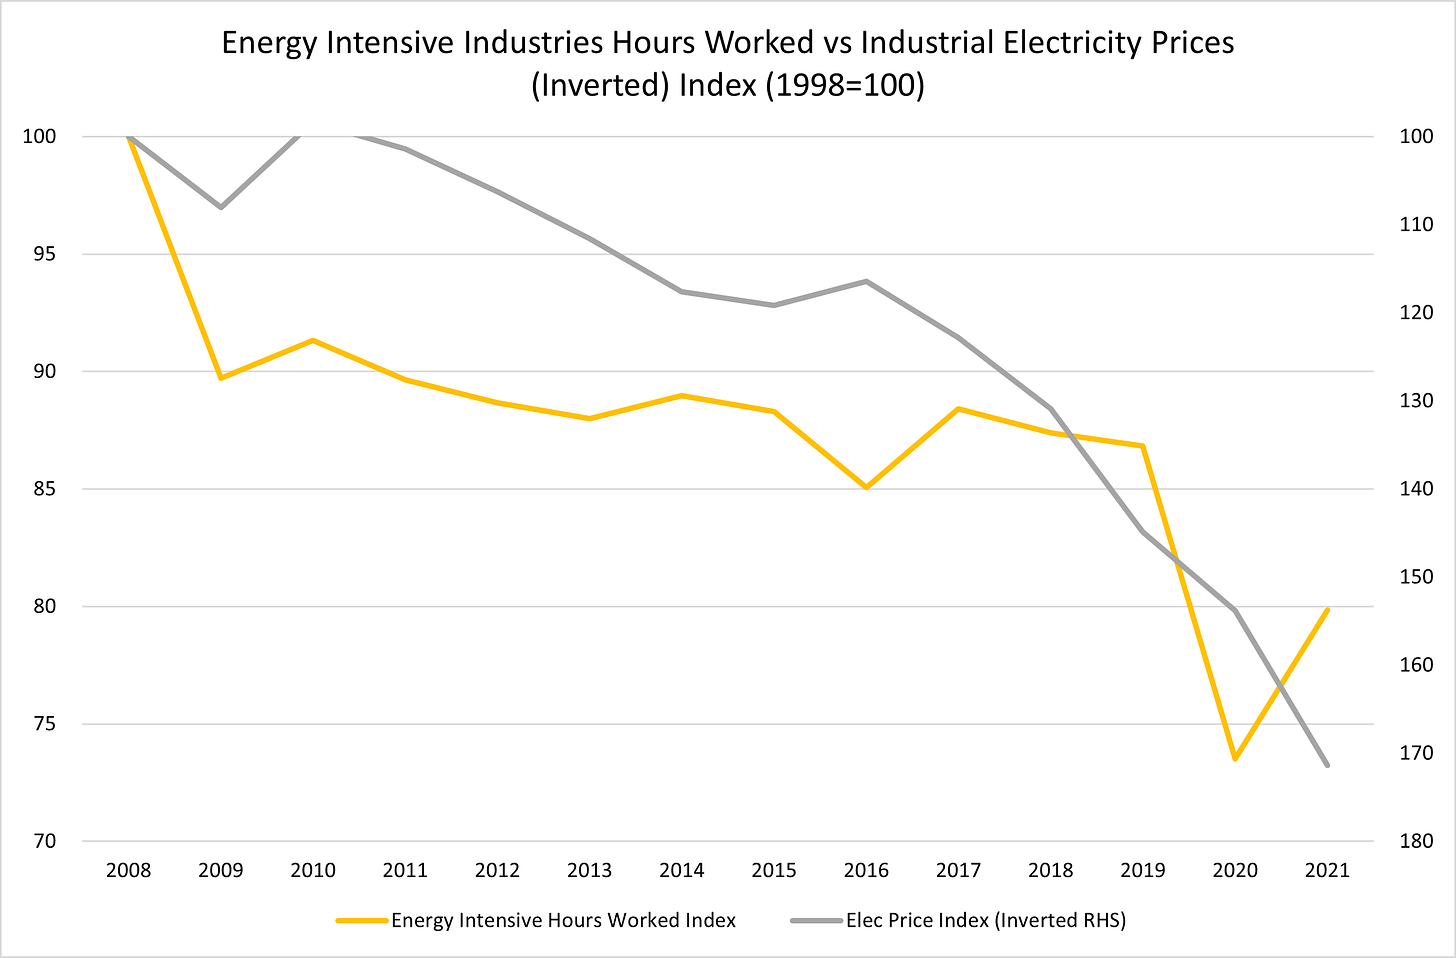 High UK electricity prices driving lower employment in energy intensive industries